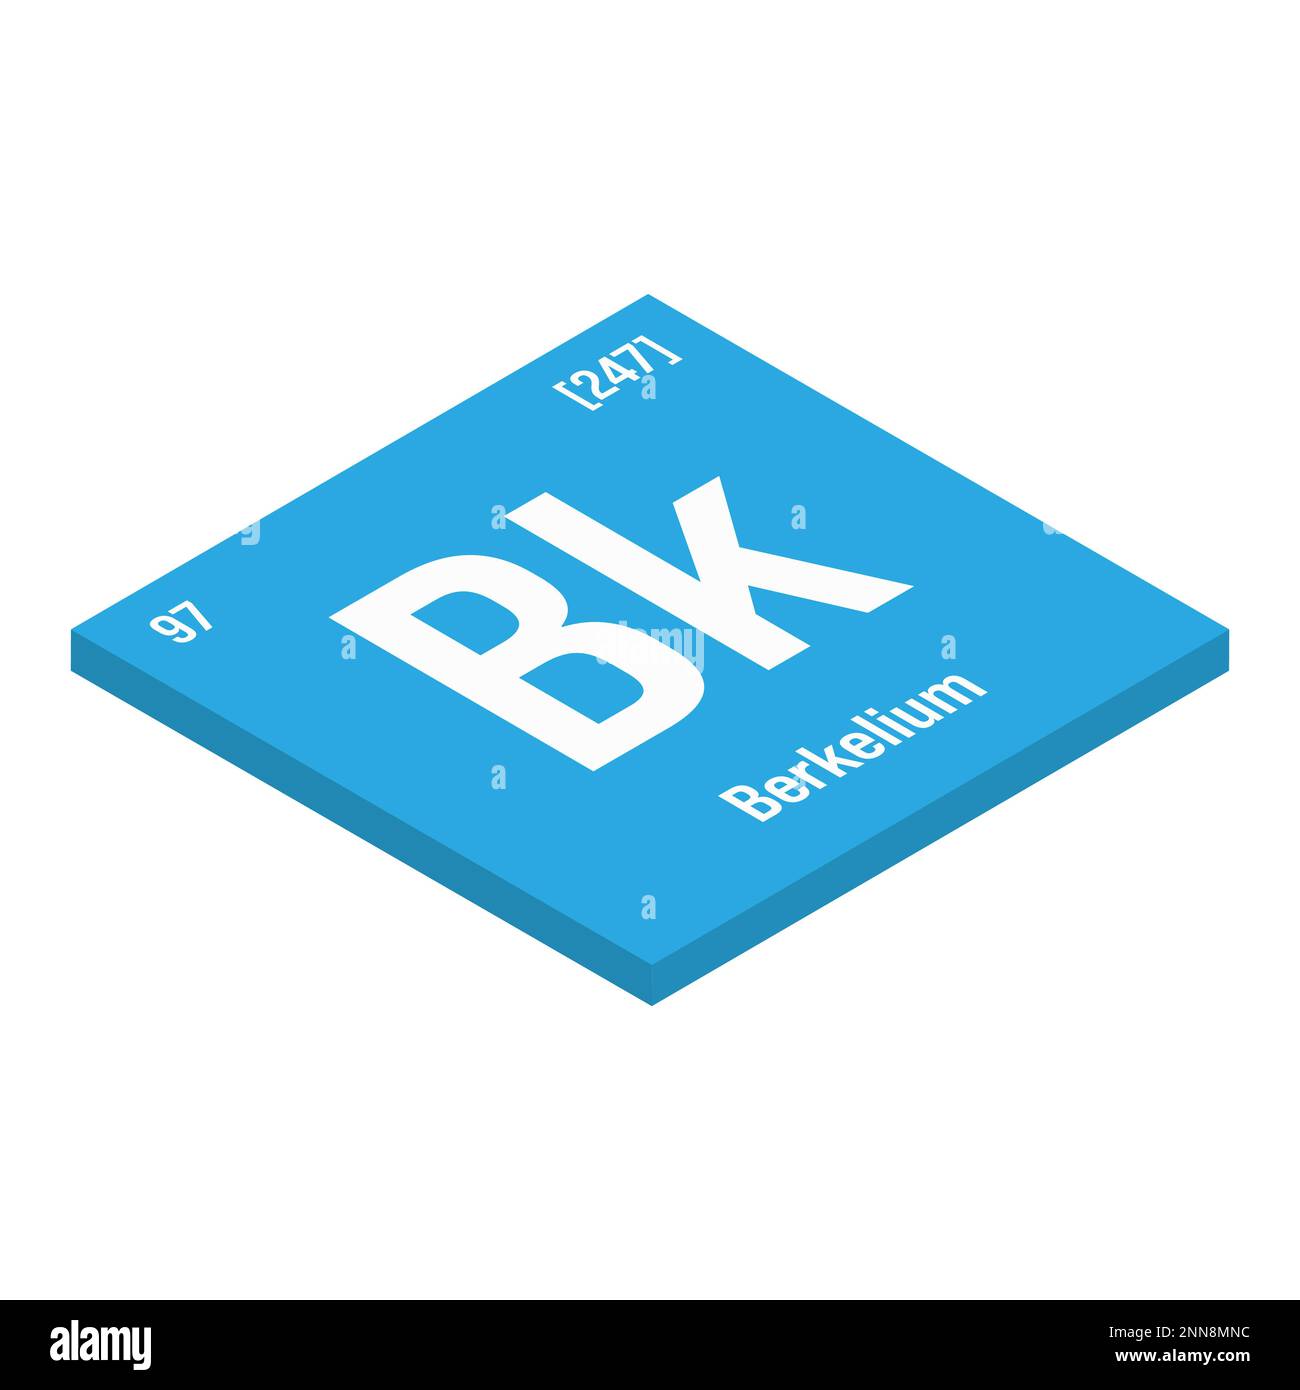 Berkelium, Bk, periodic table element with name, symbol, atomic number and weight. Synthetic radioactive element with potential uses in scientific research and nuclear power. Stock Vector